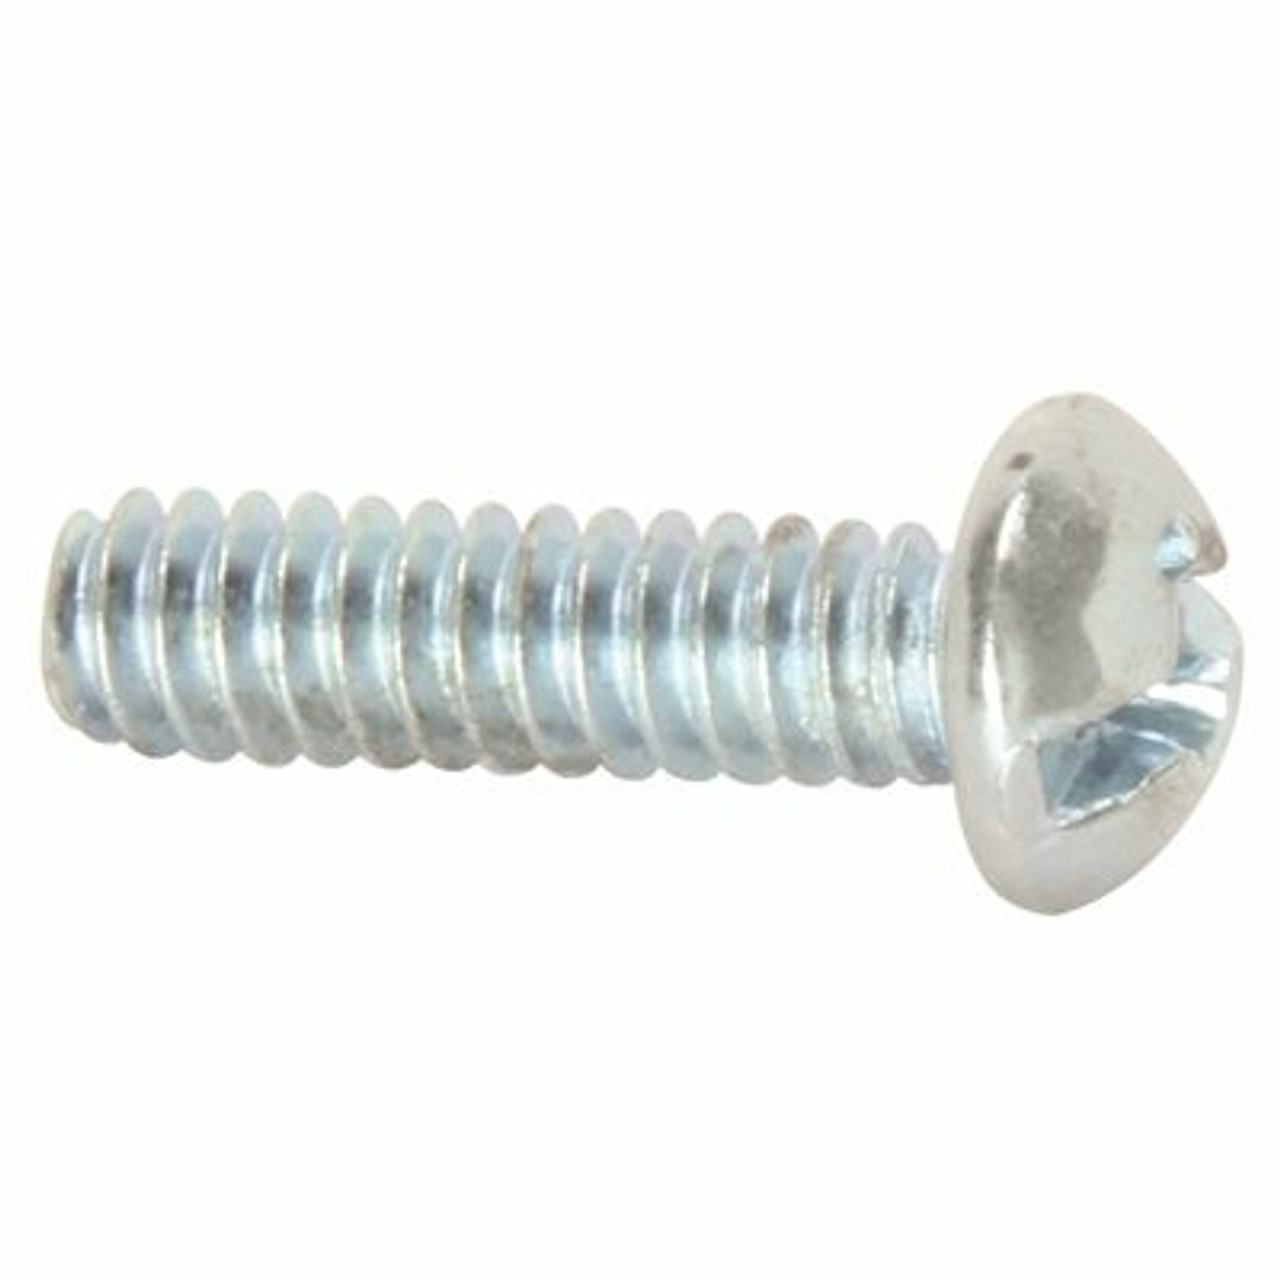 Lindstrom #6-32 Tpi X 1-1/2 In. Combo Phillips/Slotted Round Machine Screws (100 Per Pack)